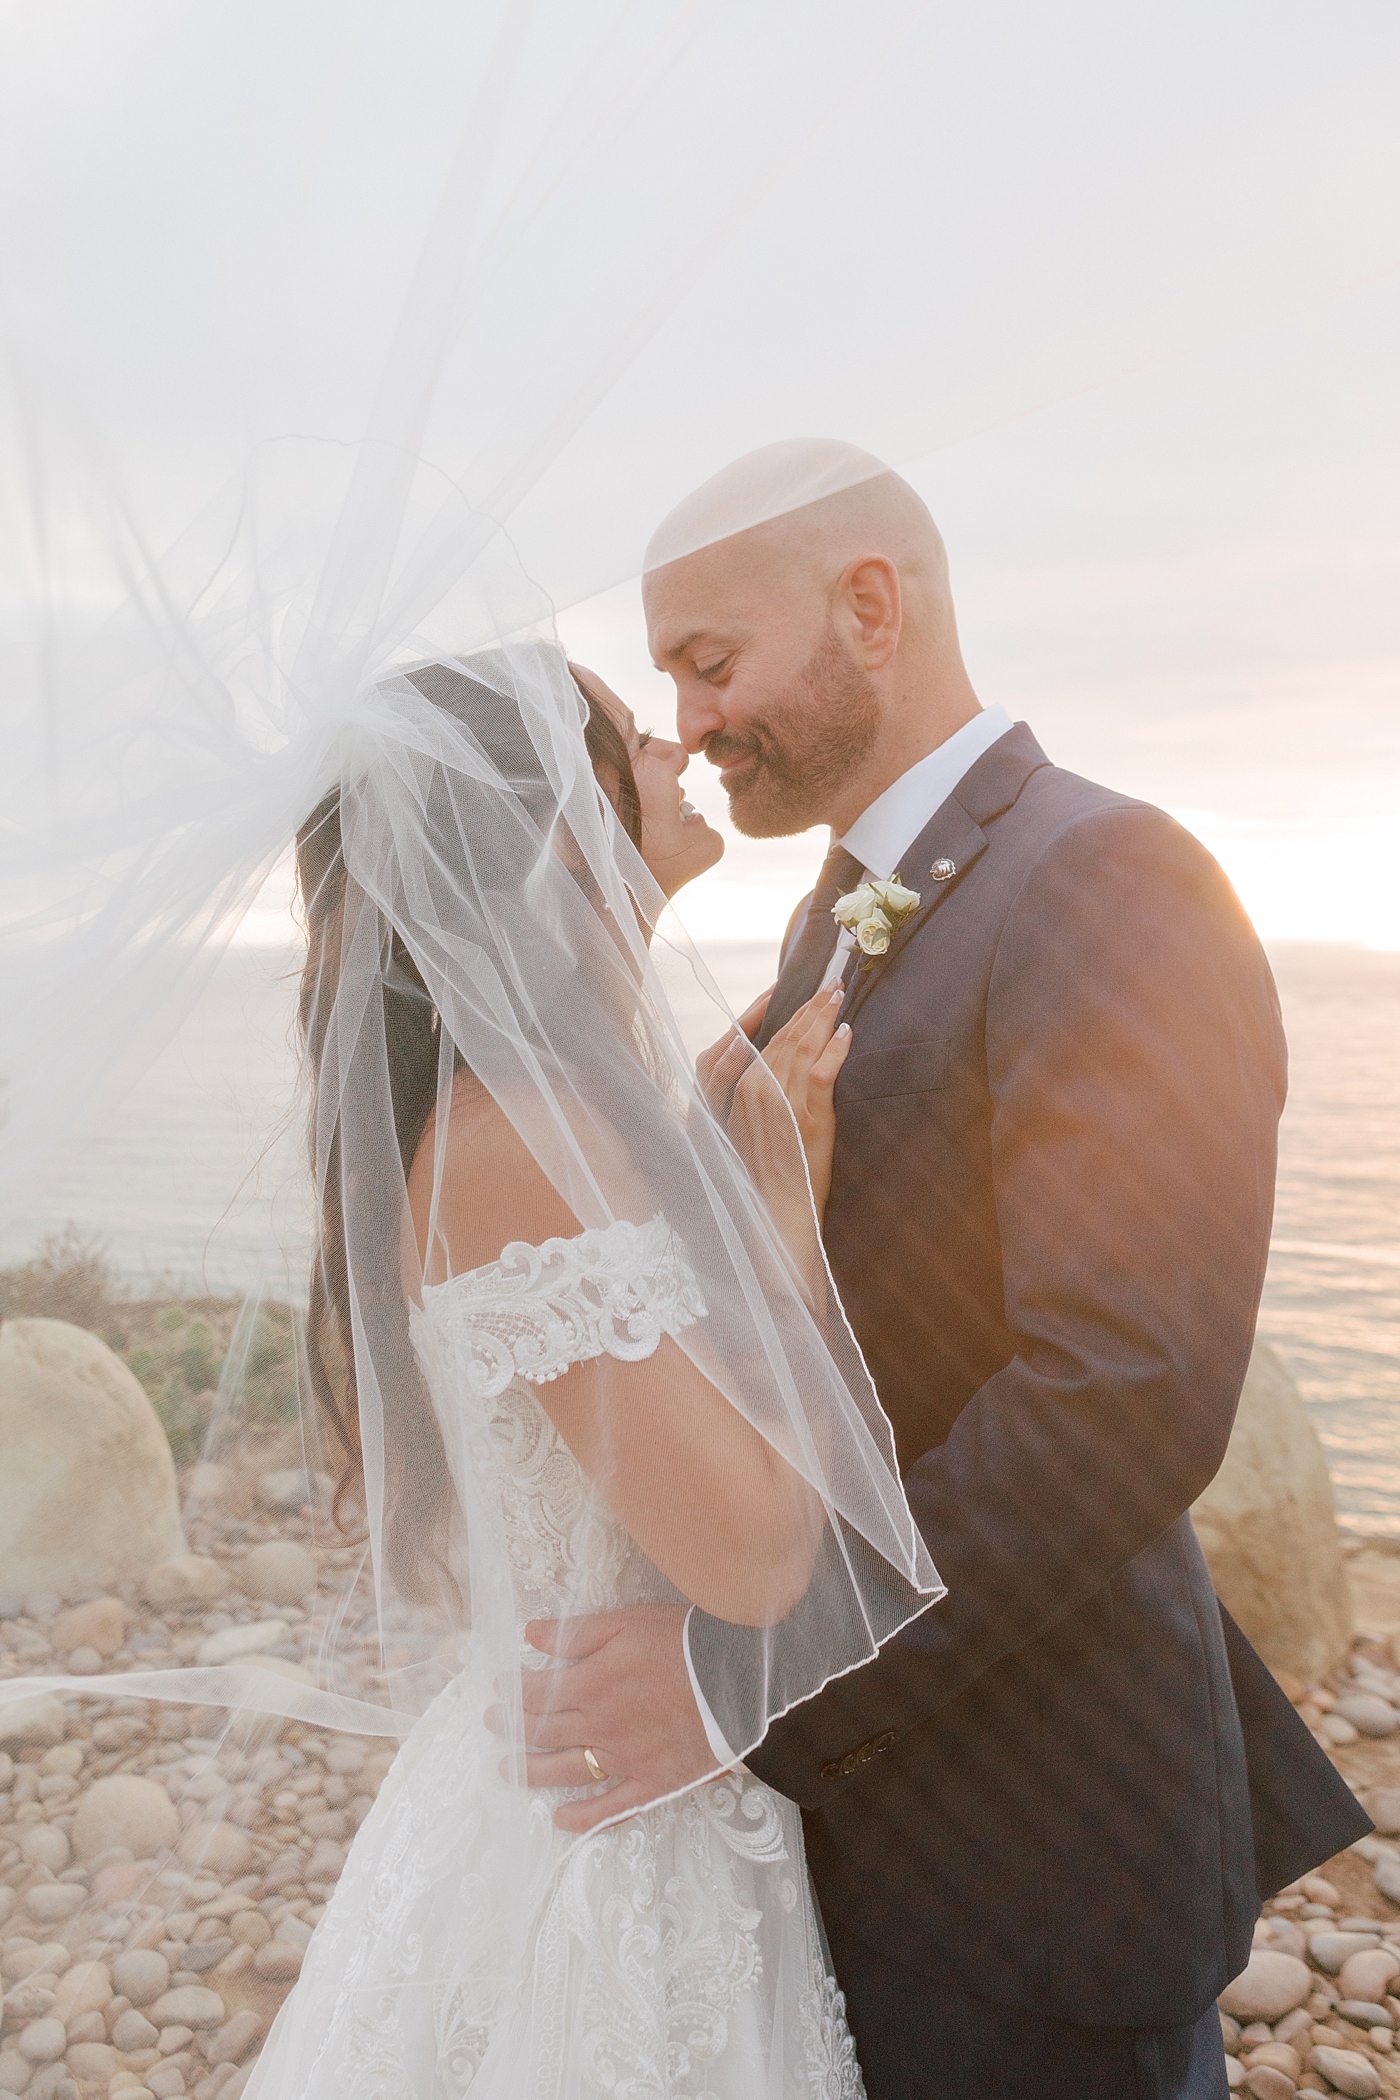 Close up of a groom in navy suit and bride in wedding dress holding each other on a seaside path at sunset | Image by Hope Helmuth Photography